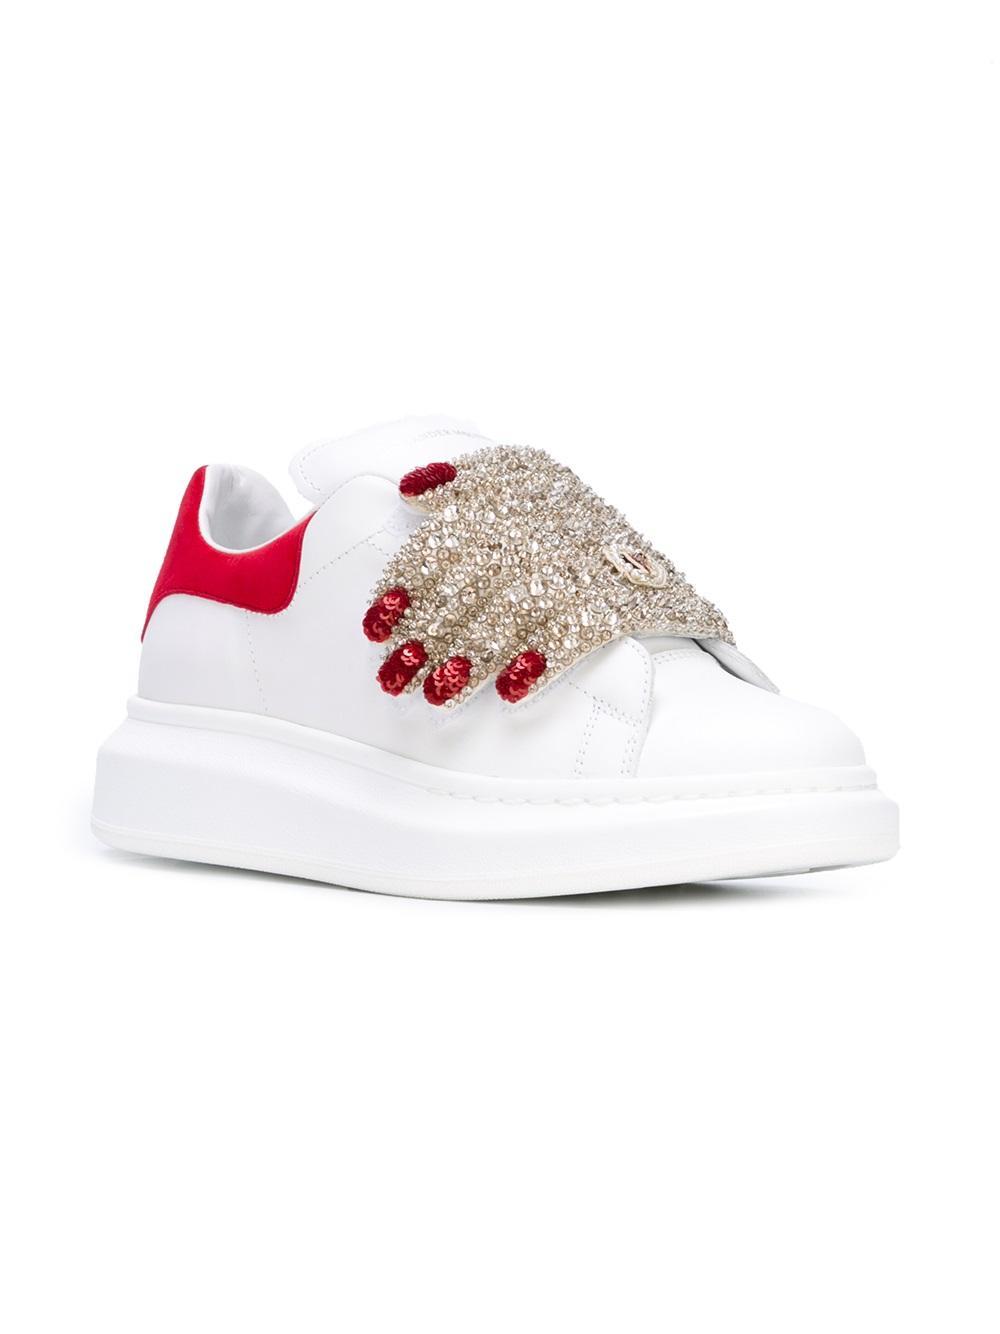 Alexander McQueen Leather Hand Embellished Sneakers in White | Lyst